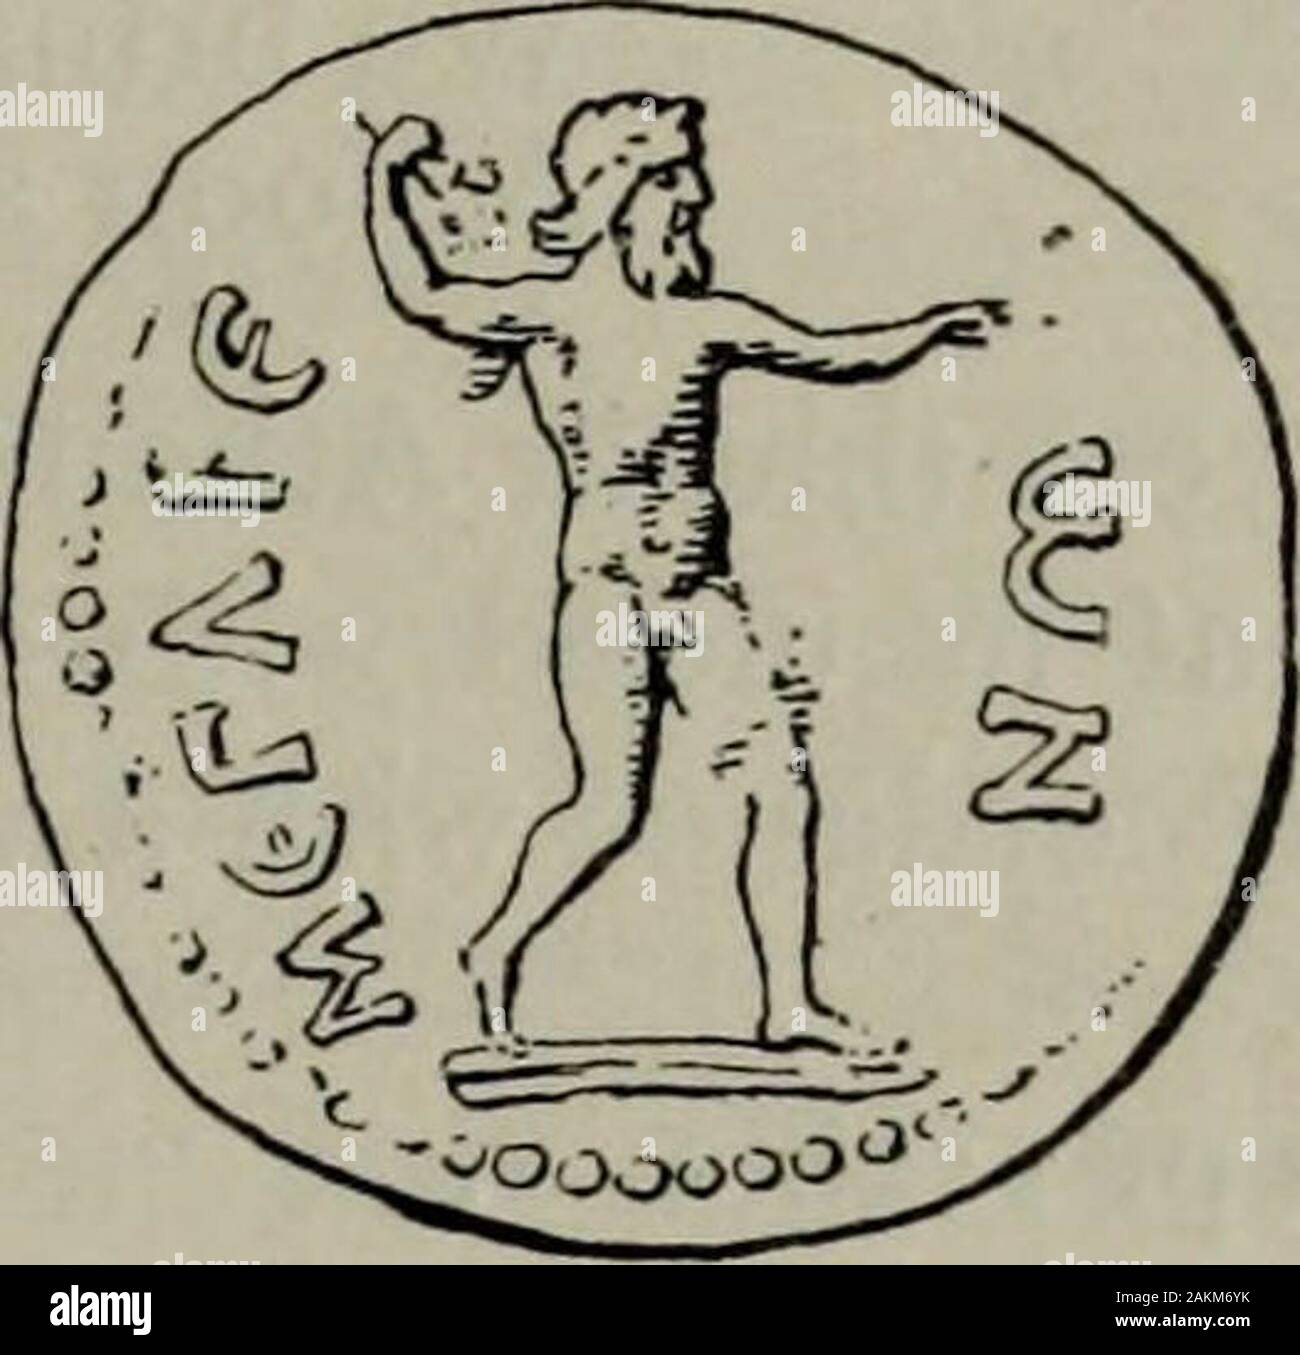 Zeus : a study in ancient religion . Fig. 959. Fig. 960. thunderbolt and eagle (Imhoof-Blumer and P. Gardner op. cit. i. 5 pi. a, 4 = my fig. 960,Head Hist, numi^ p. 394), in which—since the god sometimes has a base—we mustrecognise another statue (cp. Paus. i. 40. 6 Aios Kofiof in a context cited supra p. 257n. 4, Paus. I. 43. 6 koX iv t relxovs&lt;jvv6vT€s eoprd^ovcLv (a paraphrase of Thouk. i. 126 cited supra p. 1138 n. 2) = Favorin.lex. p. 492, 36 f. ^ See A. N. Skias in the UpaKT. dpx- €t. 1893 pi. A. The Ilissos-site is highly probable, but not absolutely certain; for the Kephisos-site(W Stock Photo